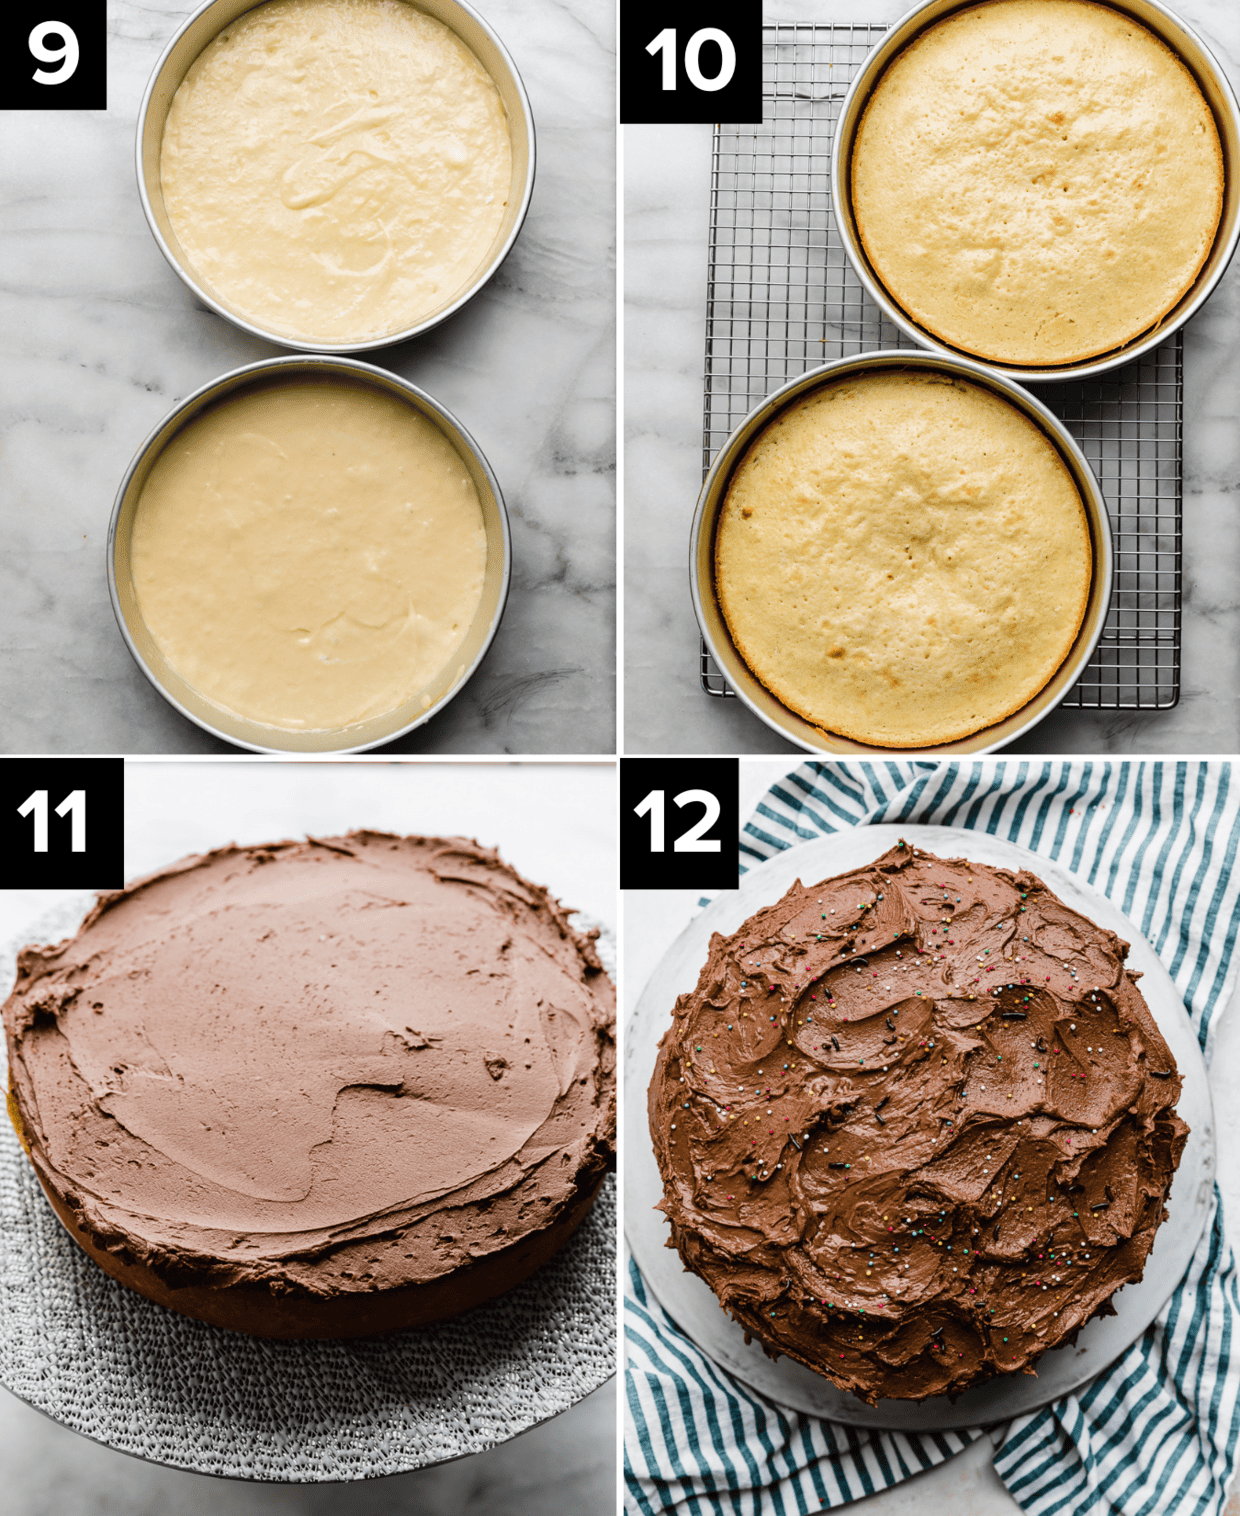 Four photos showing how to make Yellow Cake with Chocolate Frosting, top left image is two cake rounds with yellow cake batter in them, top right image is baked yellow cake recipes in two round cake pans, bottom left photo is chocolate frosting atop a single yellow cake layer, and bottom right is a chocolate frosting coated yellow cake.